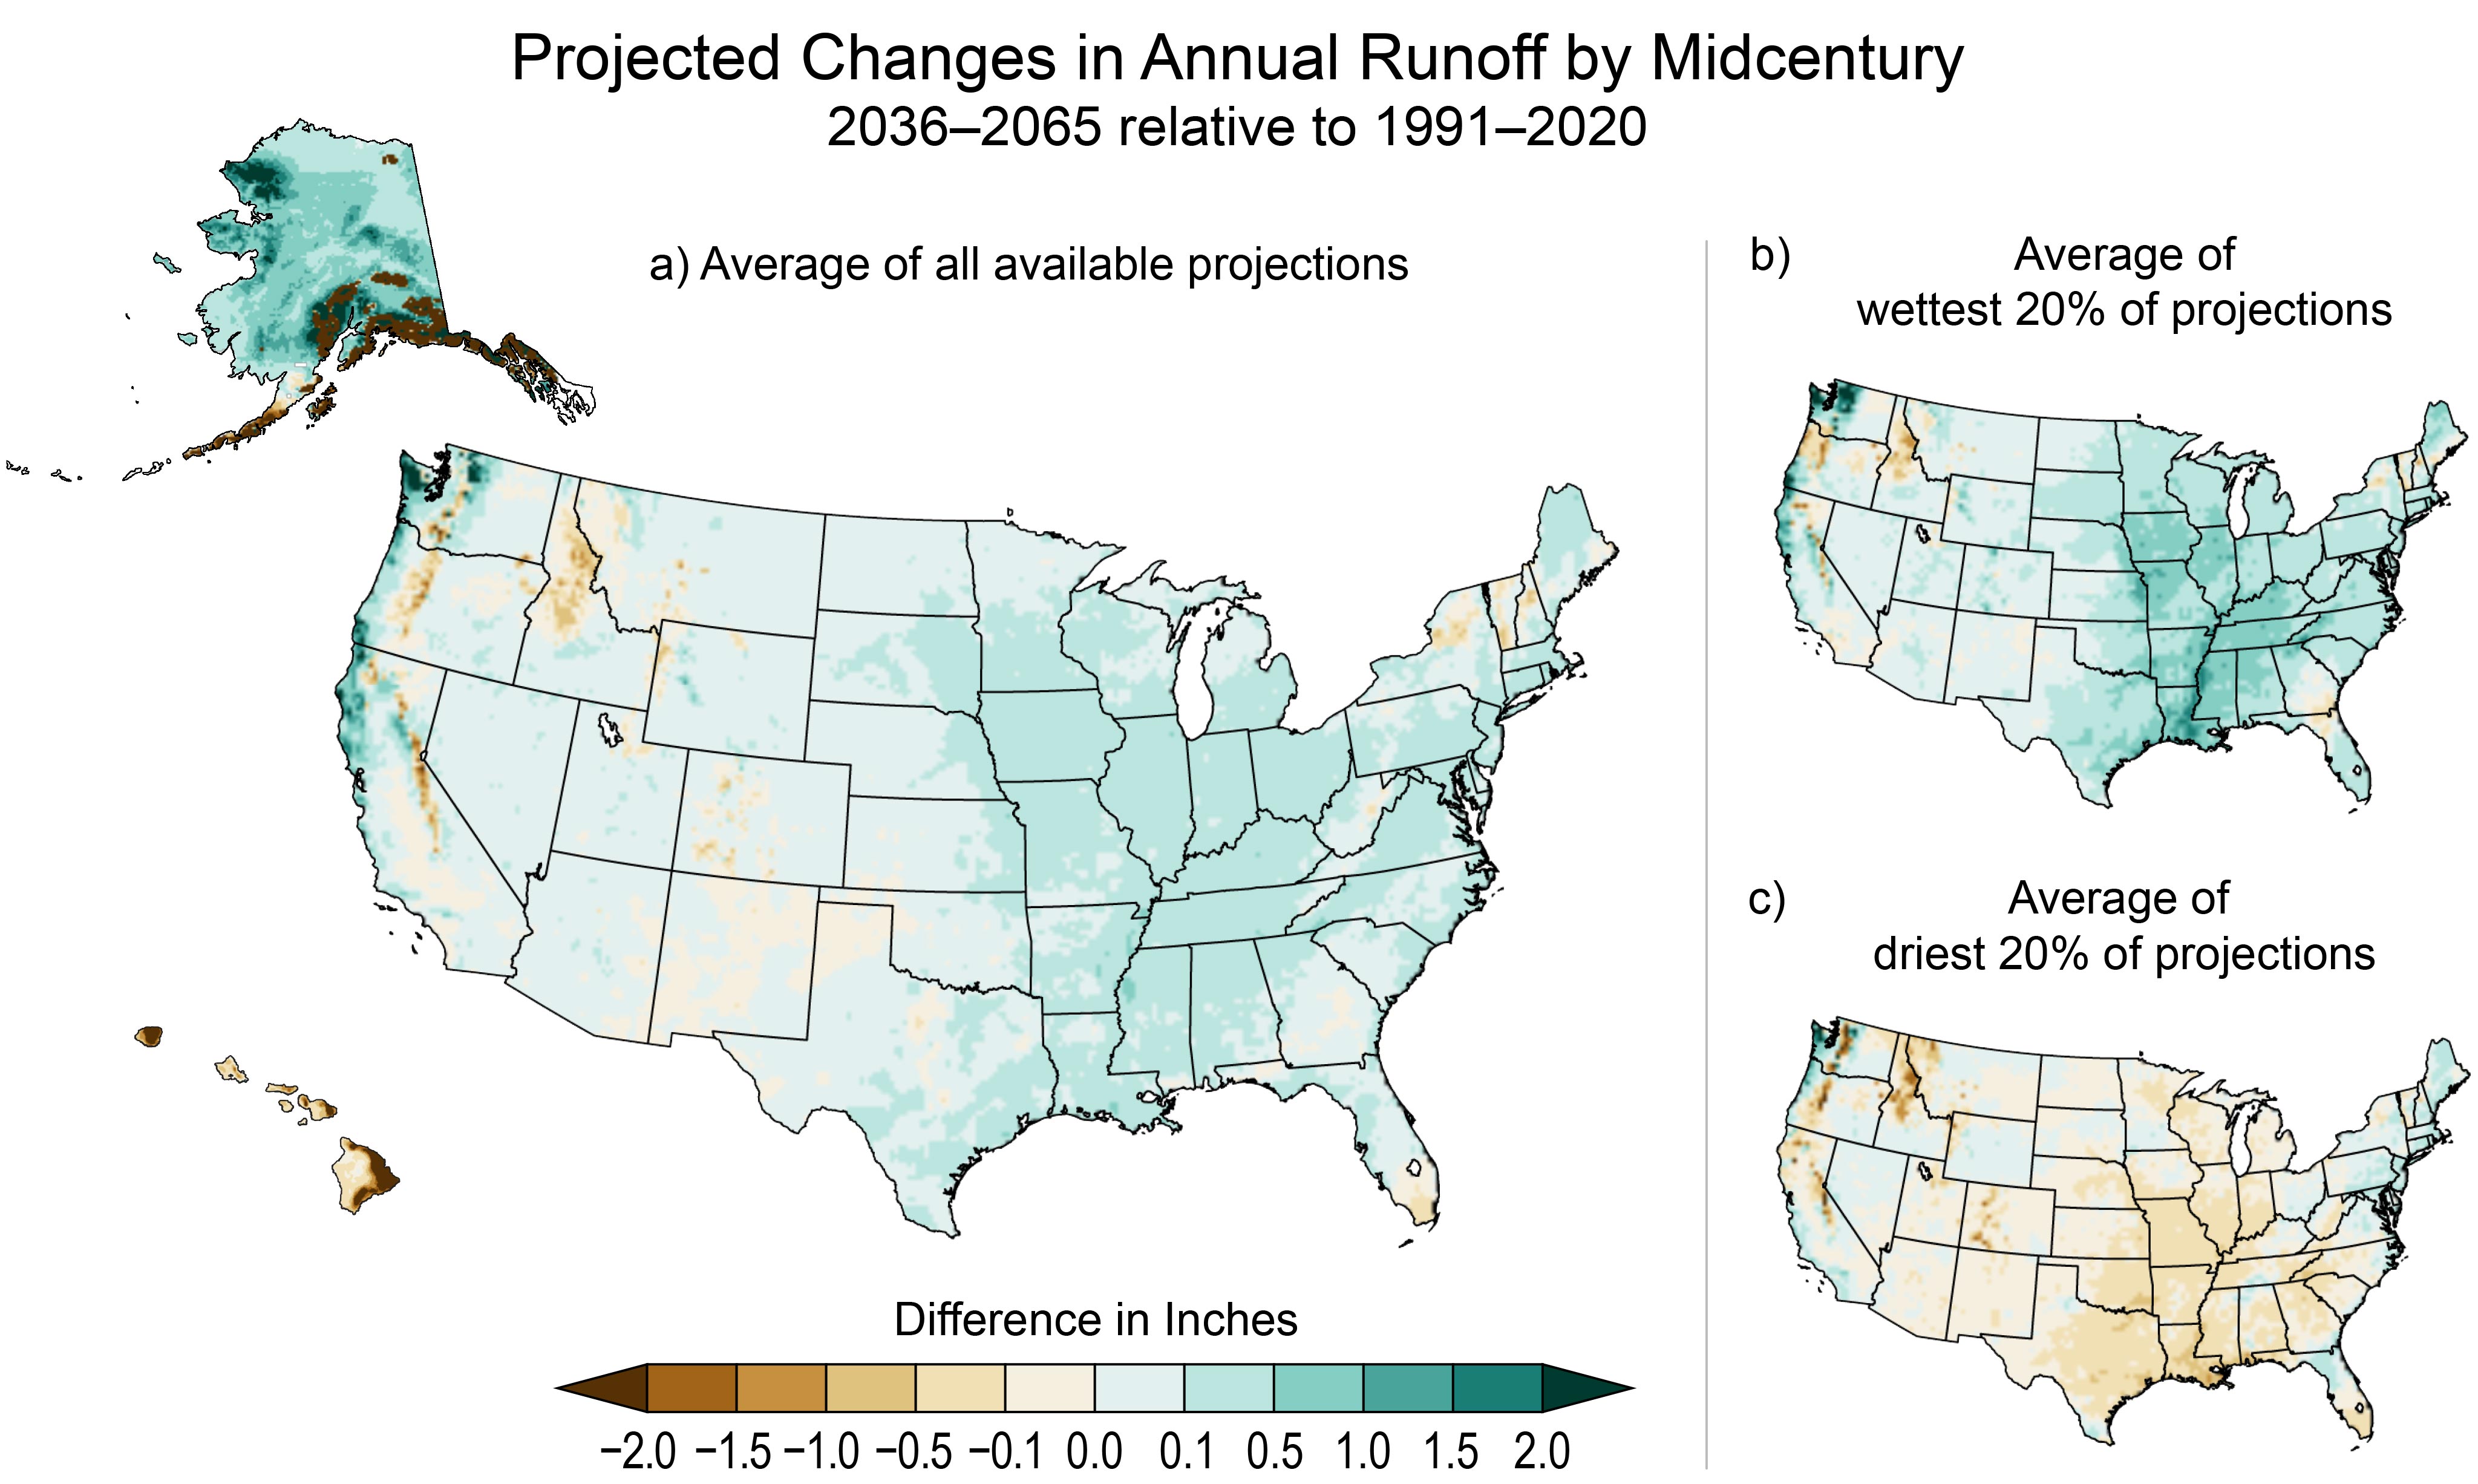 Projected Changes in Annual Runoff by Midcentury